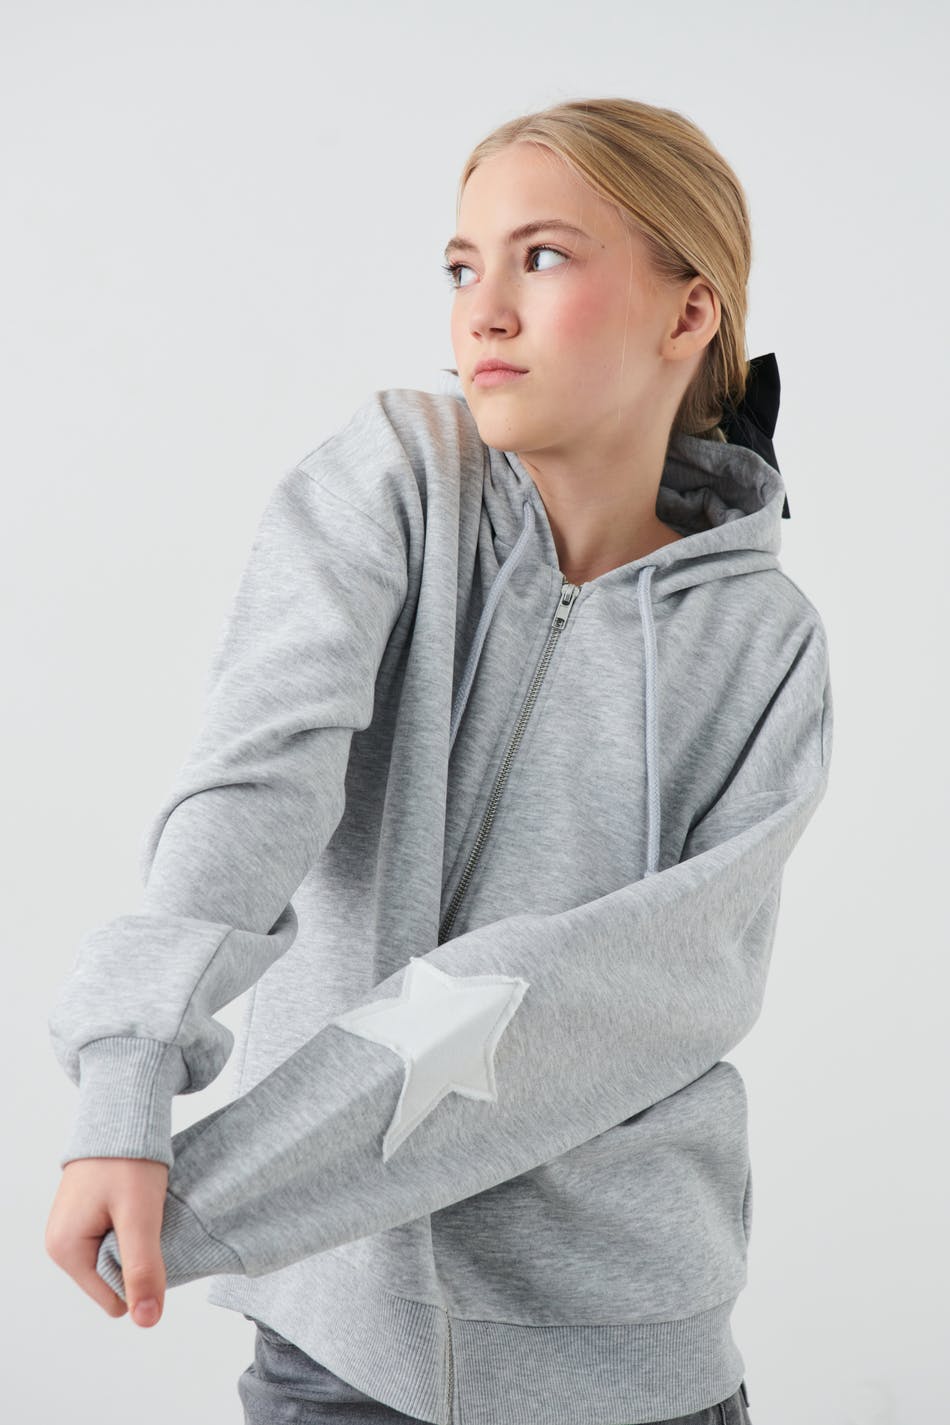 Gina Tricot - Y star zip hood - young-tops - Grey - 146/152 - Female